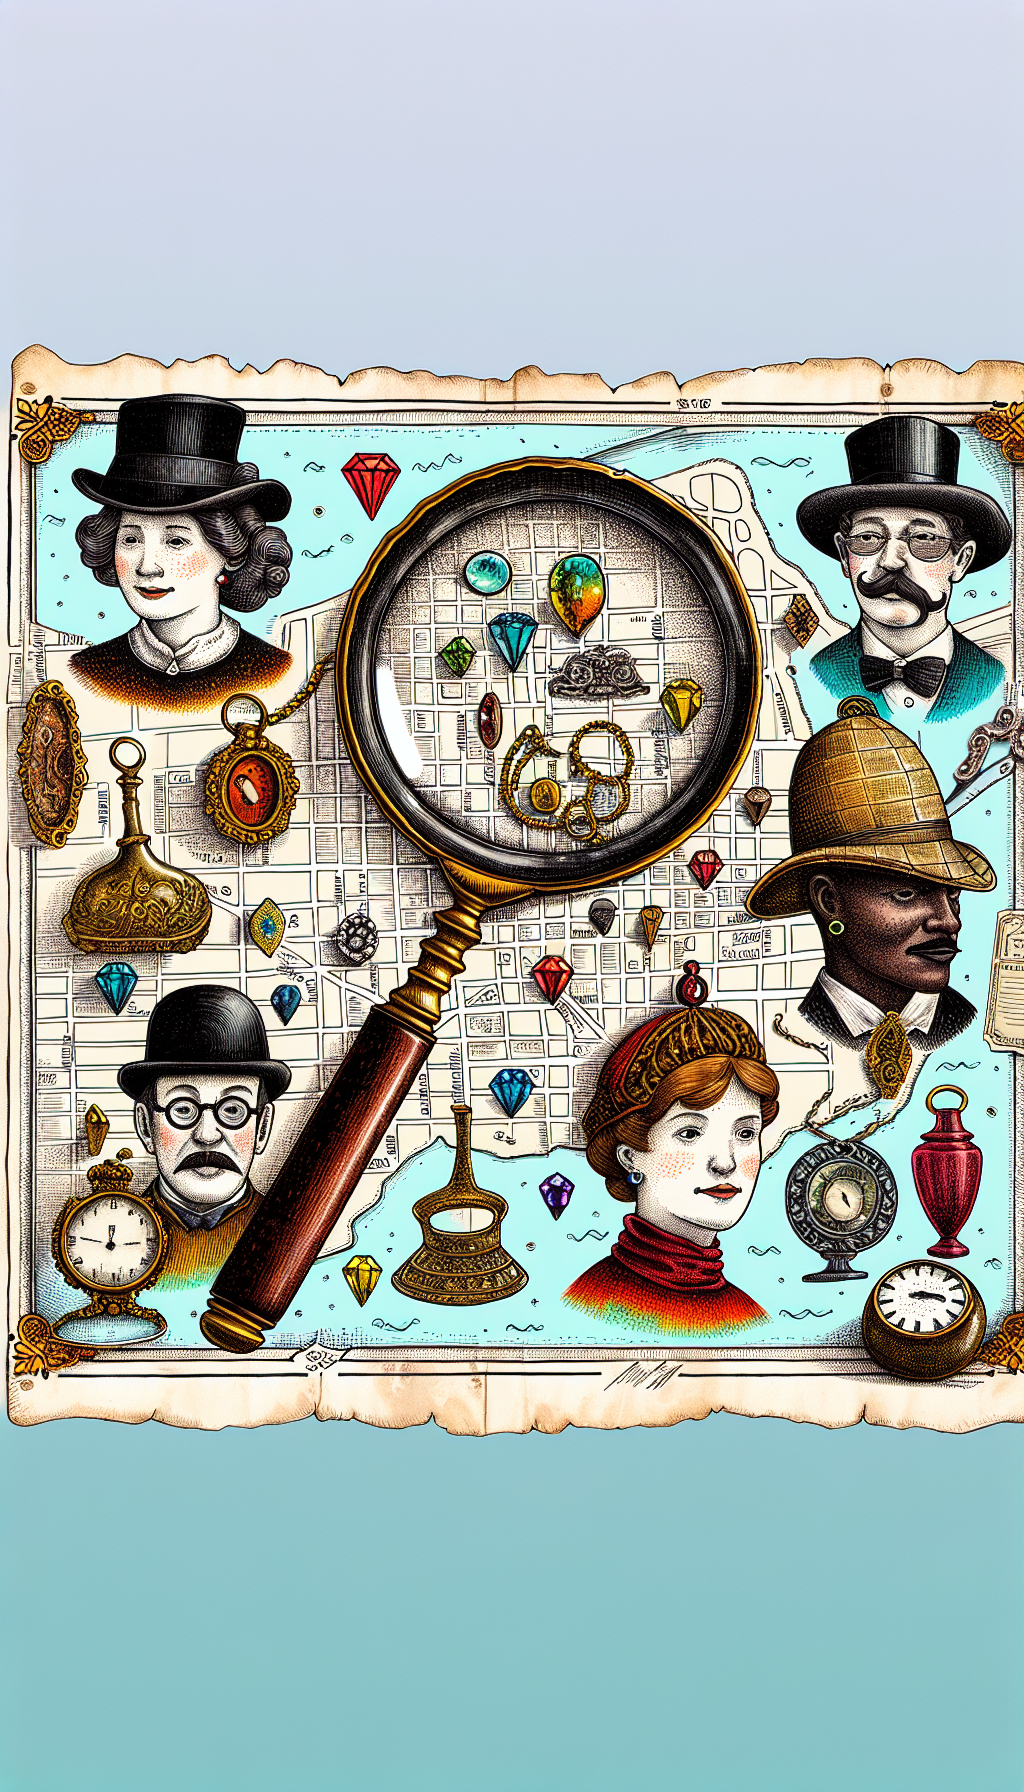 An illustration featuring a magnifying glass over a stylized local map, with various antique items (a clock, vase, jewelry, etc.) marked as notable landmarks. Encircling the map are friendly caricatures of appraisers wearing detective hats, each accompanied by a golden badge of authenticity. The magnifying glass, map, and characters are outlined with a sketchy, ink-drawn style, while the antique items are depicted in vibrant watercolors.